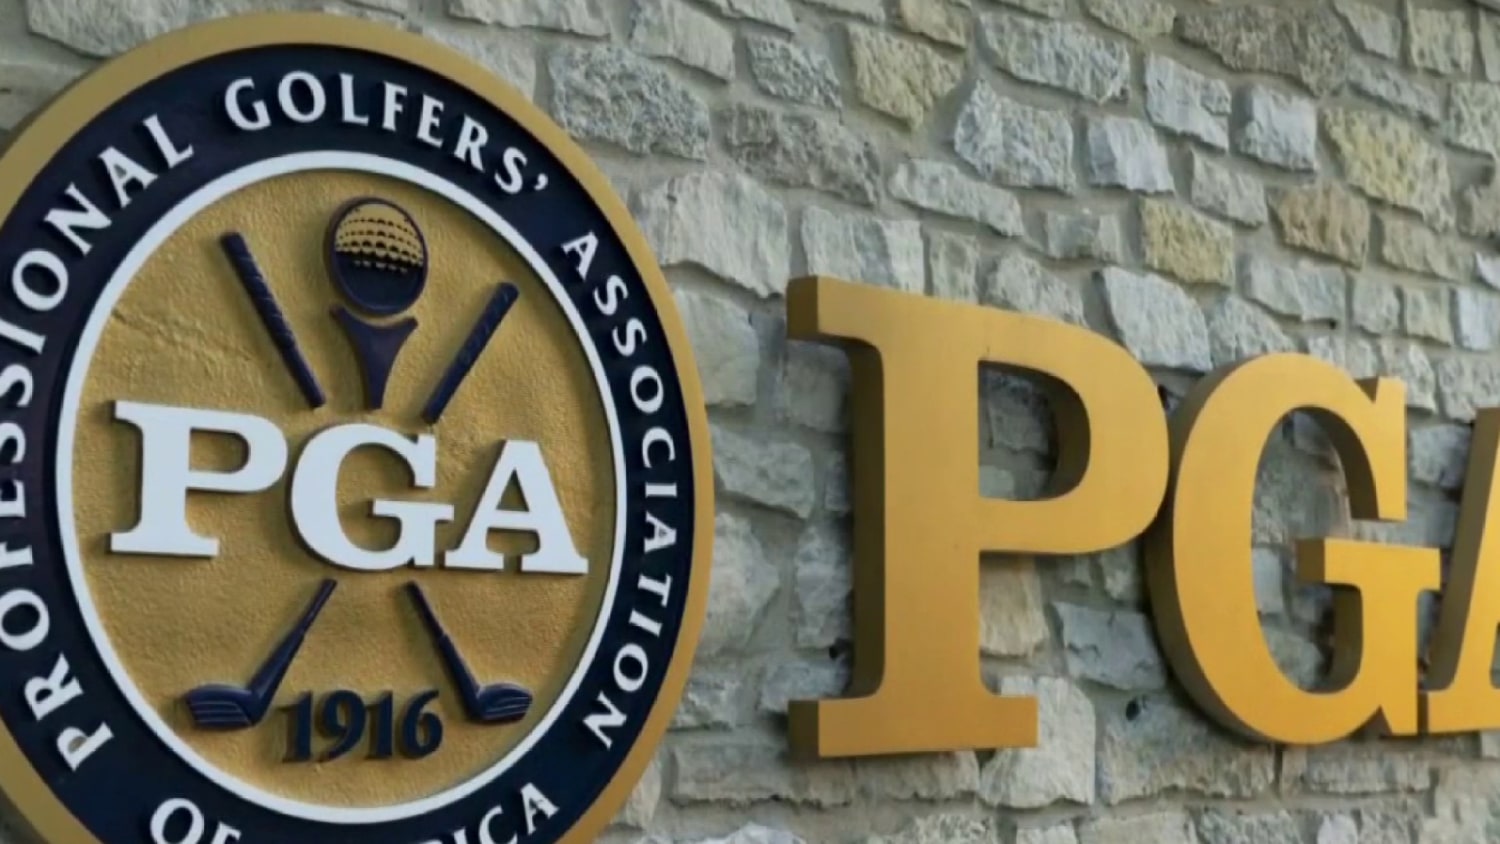 Heres why the PGA Tour just merged with LIV Golf